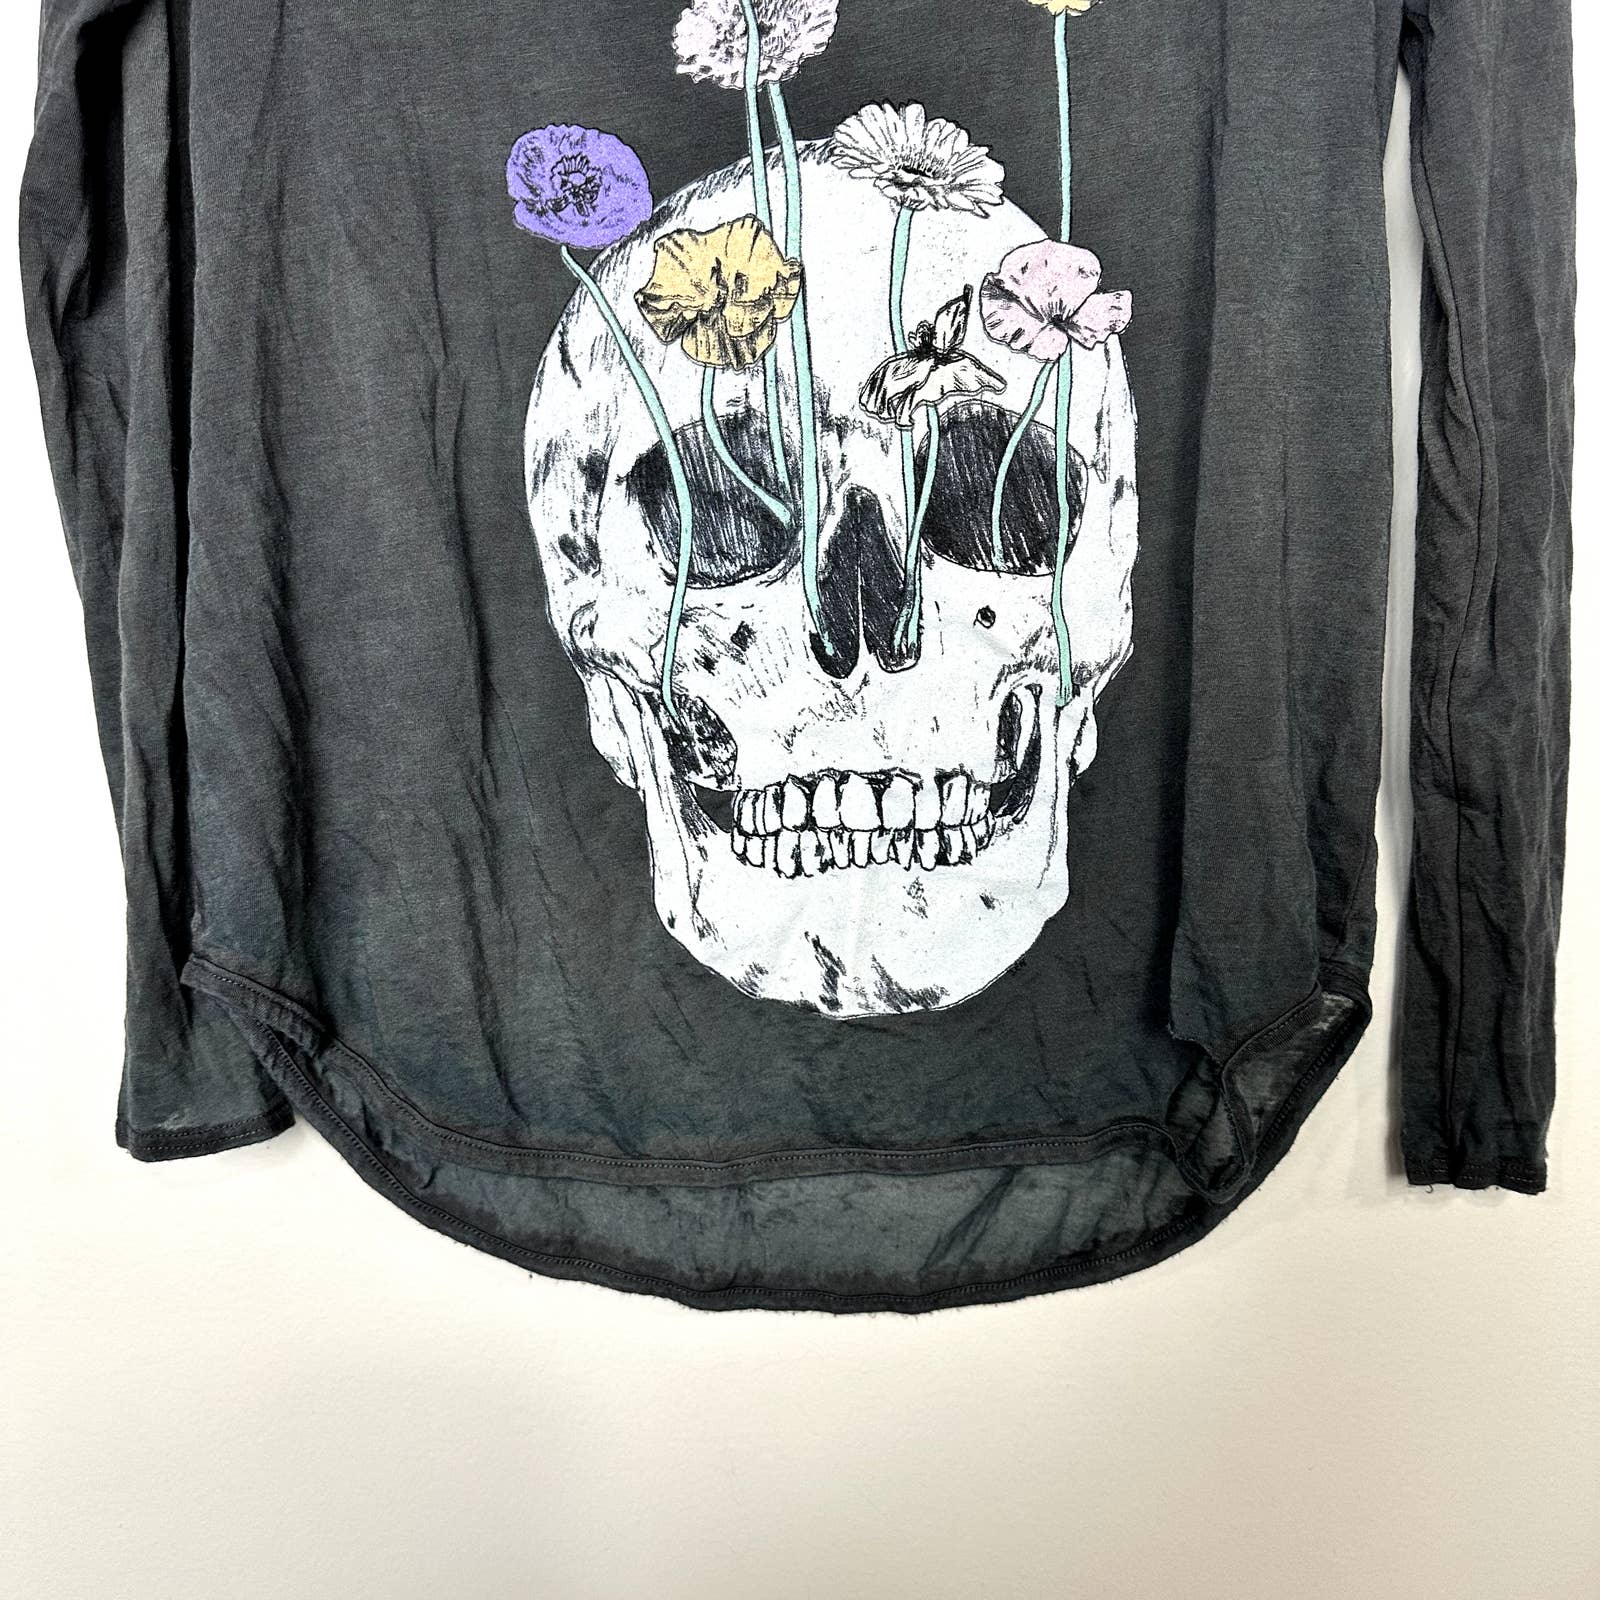 Chaser Revolve NWT Garden Skull Cutout Long Sleeve Distressed Top Union Black